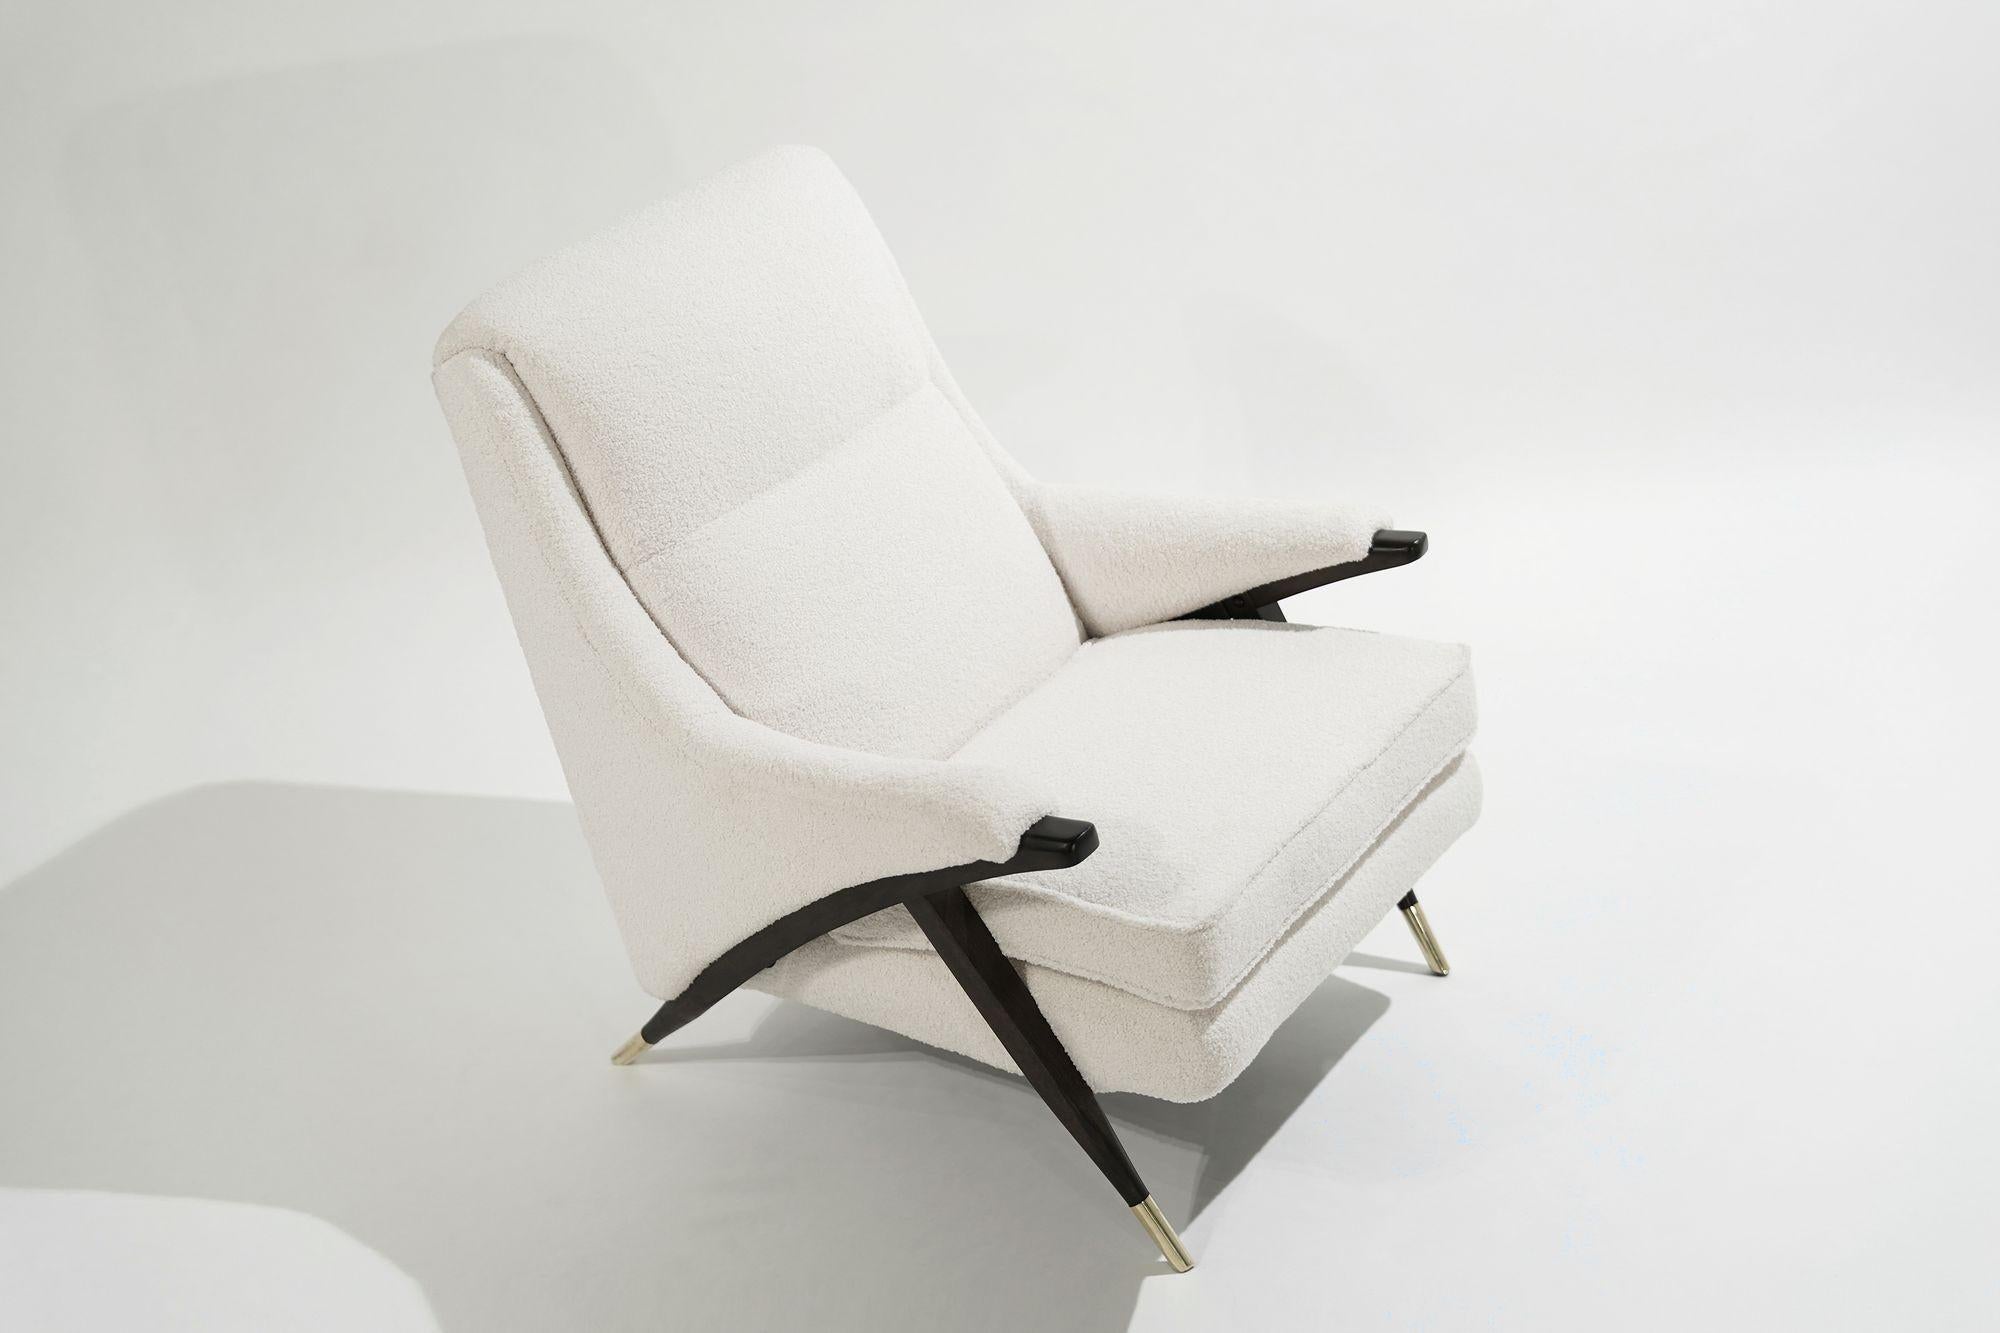 A very comfortable lounge chair by The Karpen Company of California, circa 1950-1959. Completely restored down to its frame, fitted with all new springs, foam, straps, and dacron. Reupholstered in off-white Italian bouclé. Walnut arms and legs were